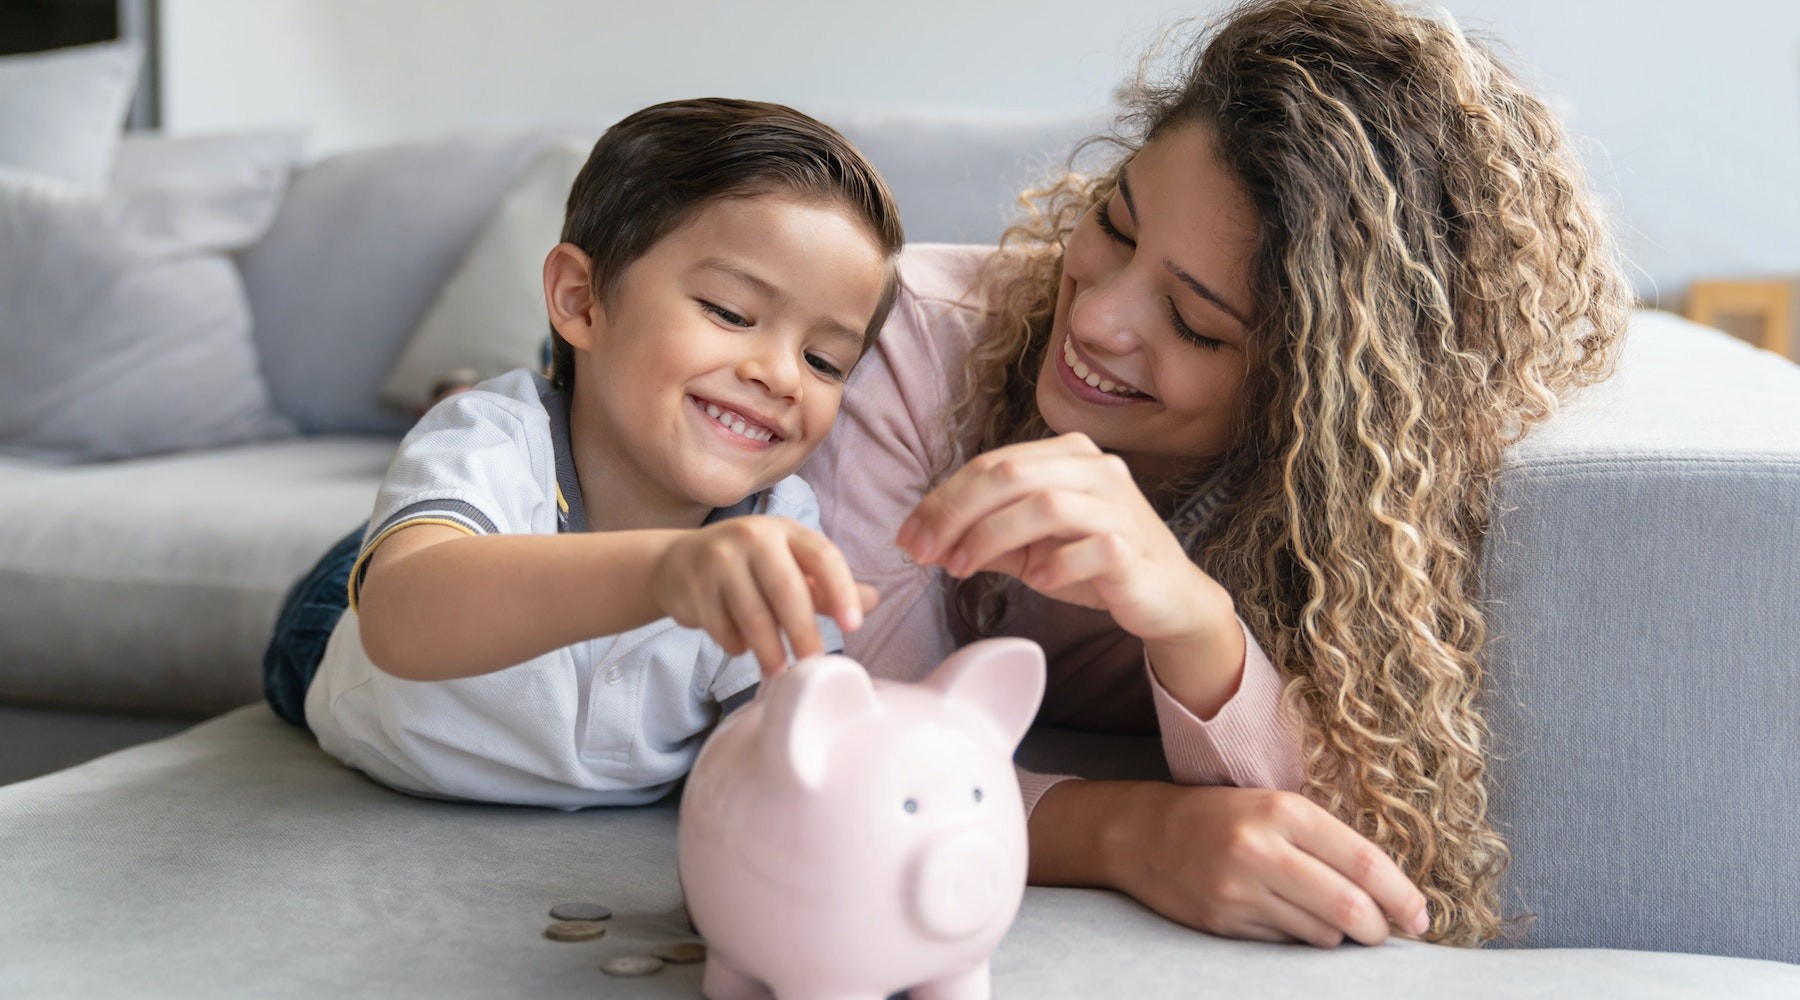 Child putting money in piggy bank with mom.